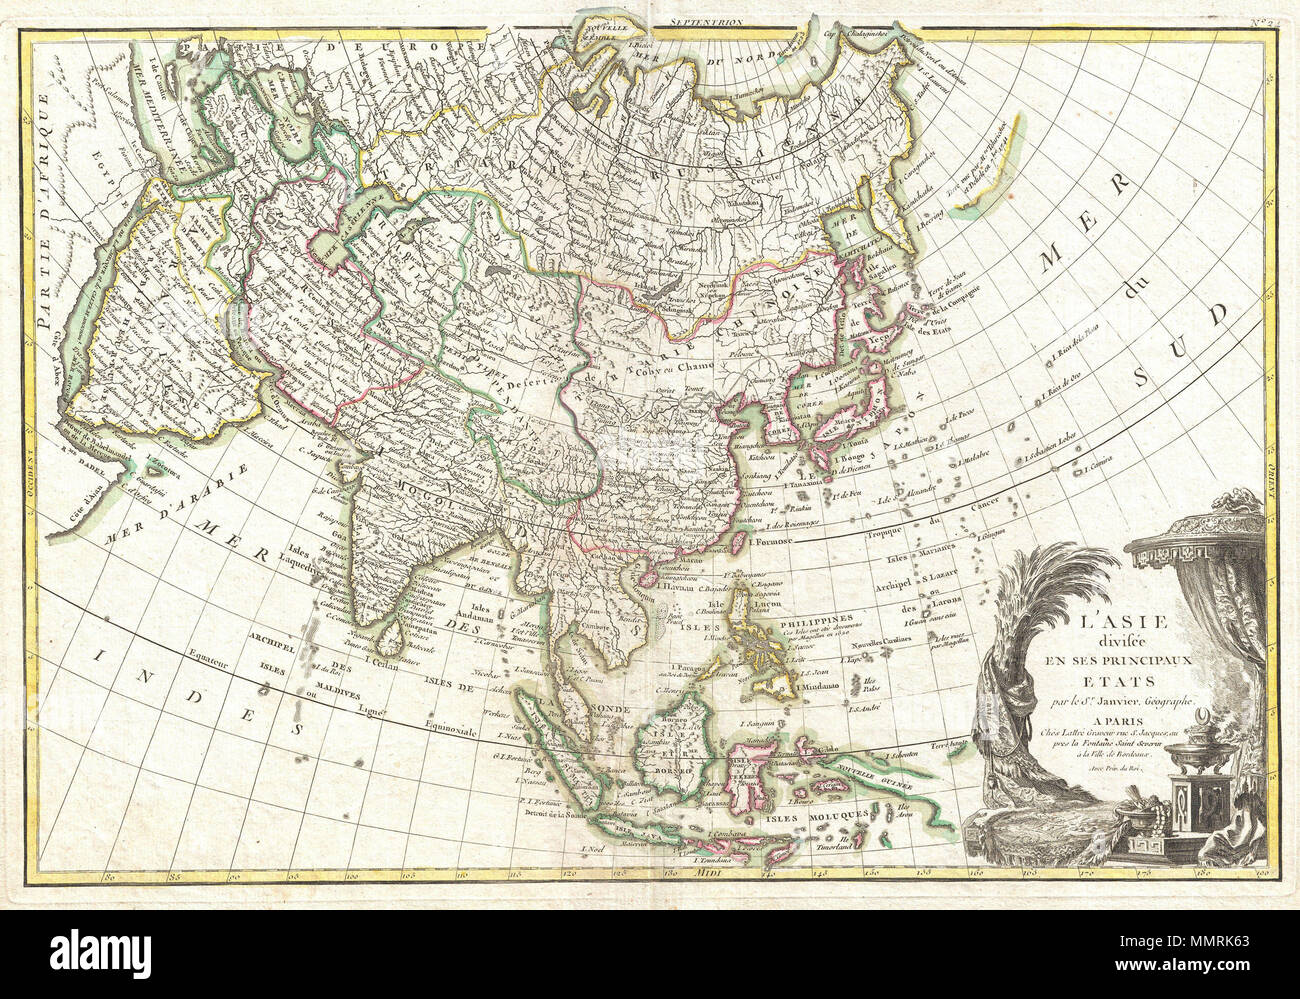 .  English: A beautiful example of Le Sieur Janvier's 1771 map of Asia. Covers from Africa and the Mediterranean east to Bering Strait (Detroit du Norte ou d'Anian) and south as far as Java and New Guinea. This map is most interesting in its rendering of the largely unexplored extreme northwest of Asia. Yeco or Hokkaido is mapped only speculatively with its western borders unknown. Shows Sakhalin Island in an embryonic state. Just to the east of Yeco (Hokkaido), Janvier maps the apocryphal Terre de Gama or Terre de la Company. Often called de Gamma Land or Gama, these islands were supposedly d Stock Photo